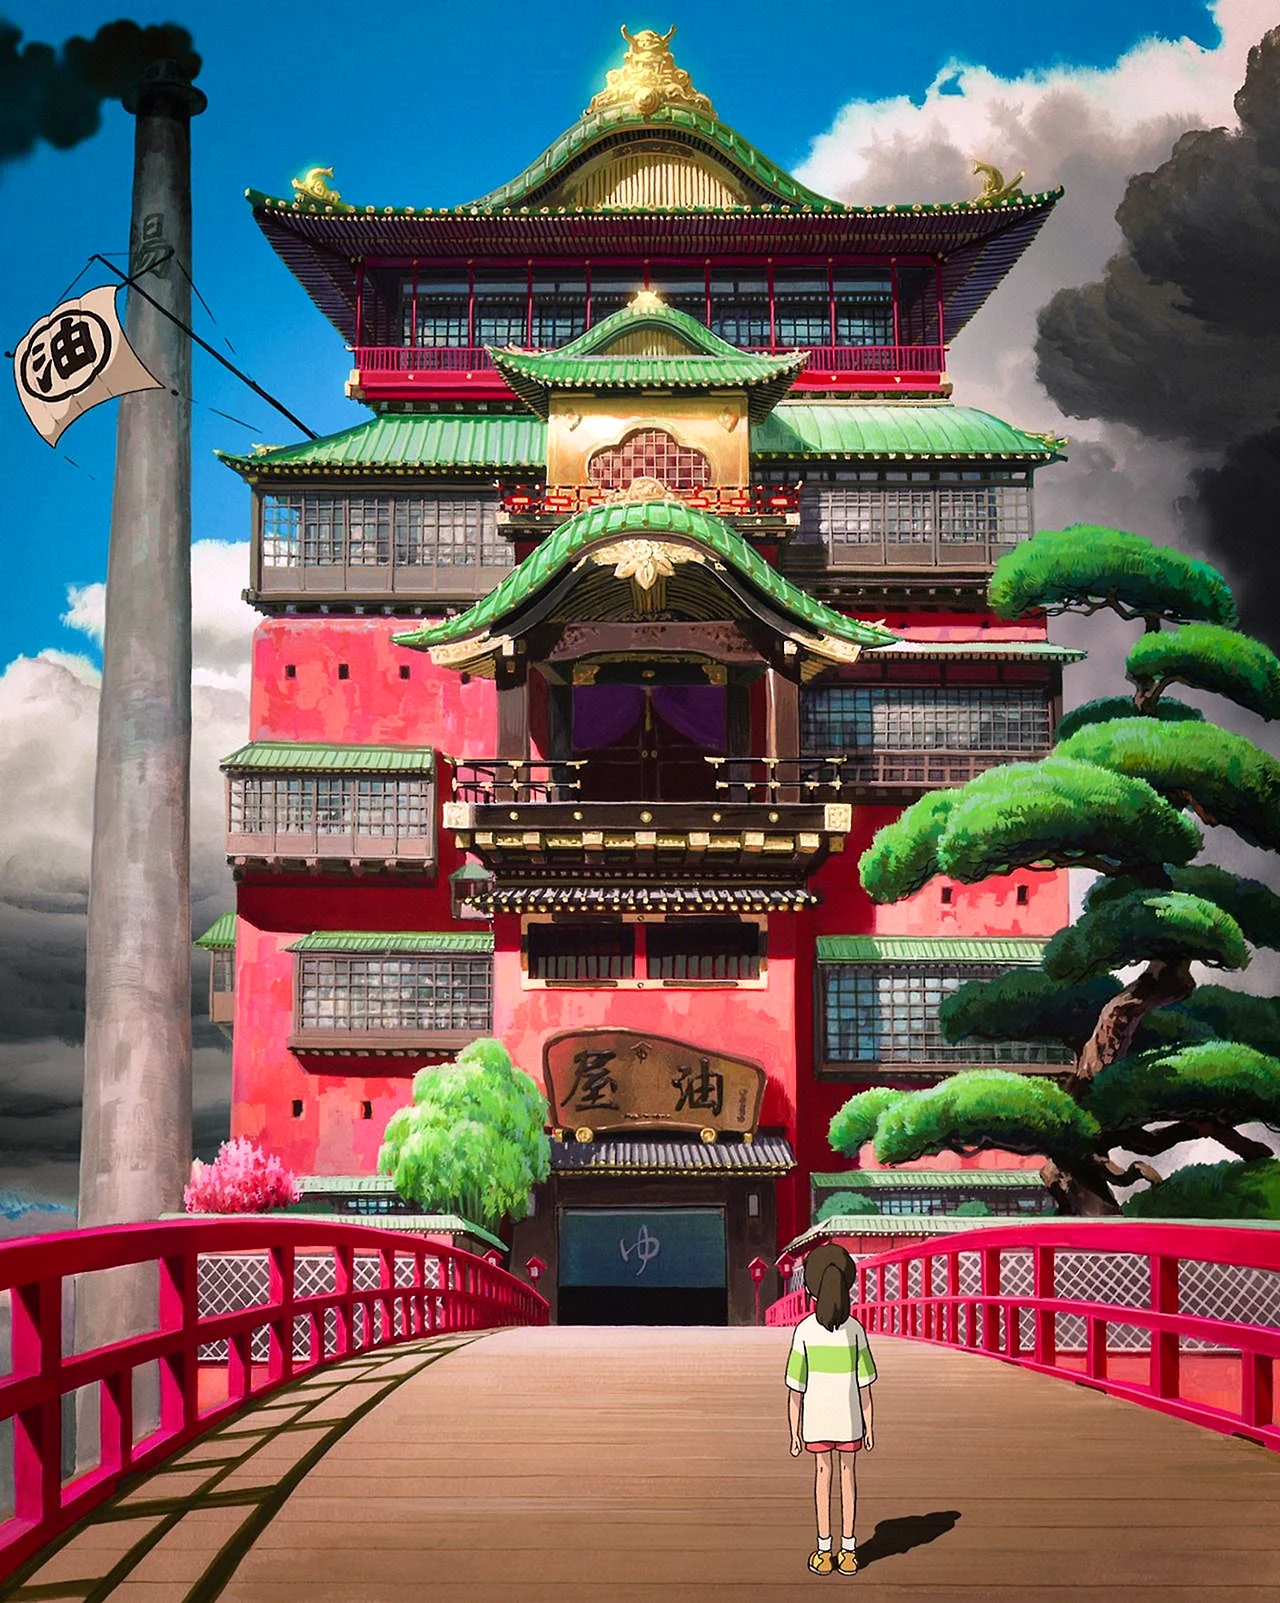 Spirited Away 2001 Wallpaper For iPhone